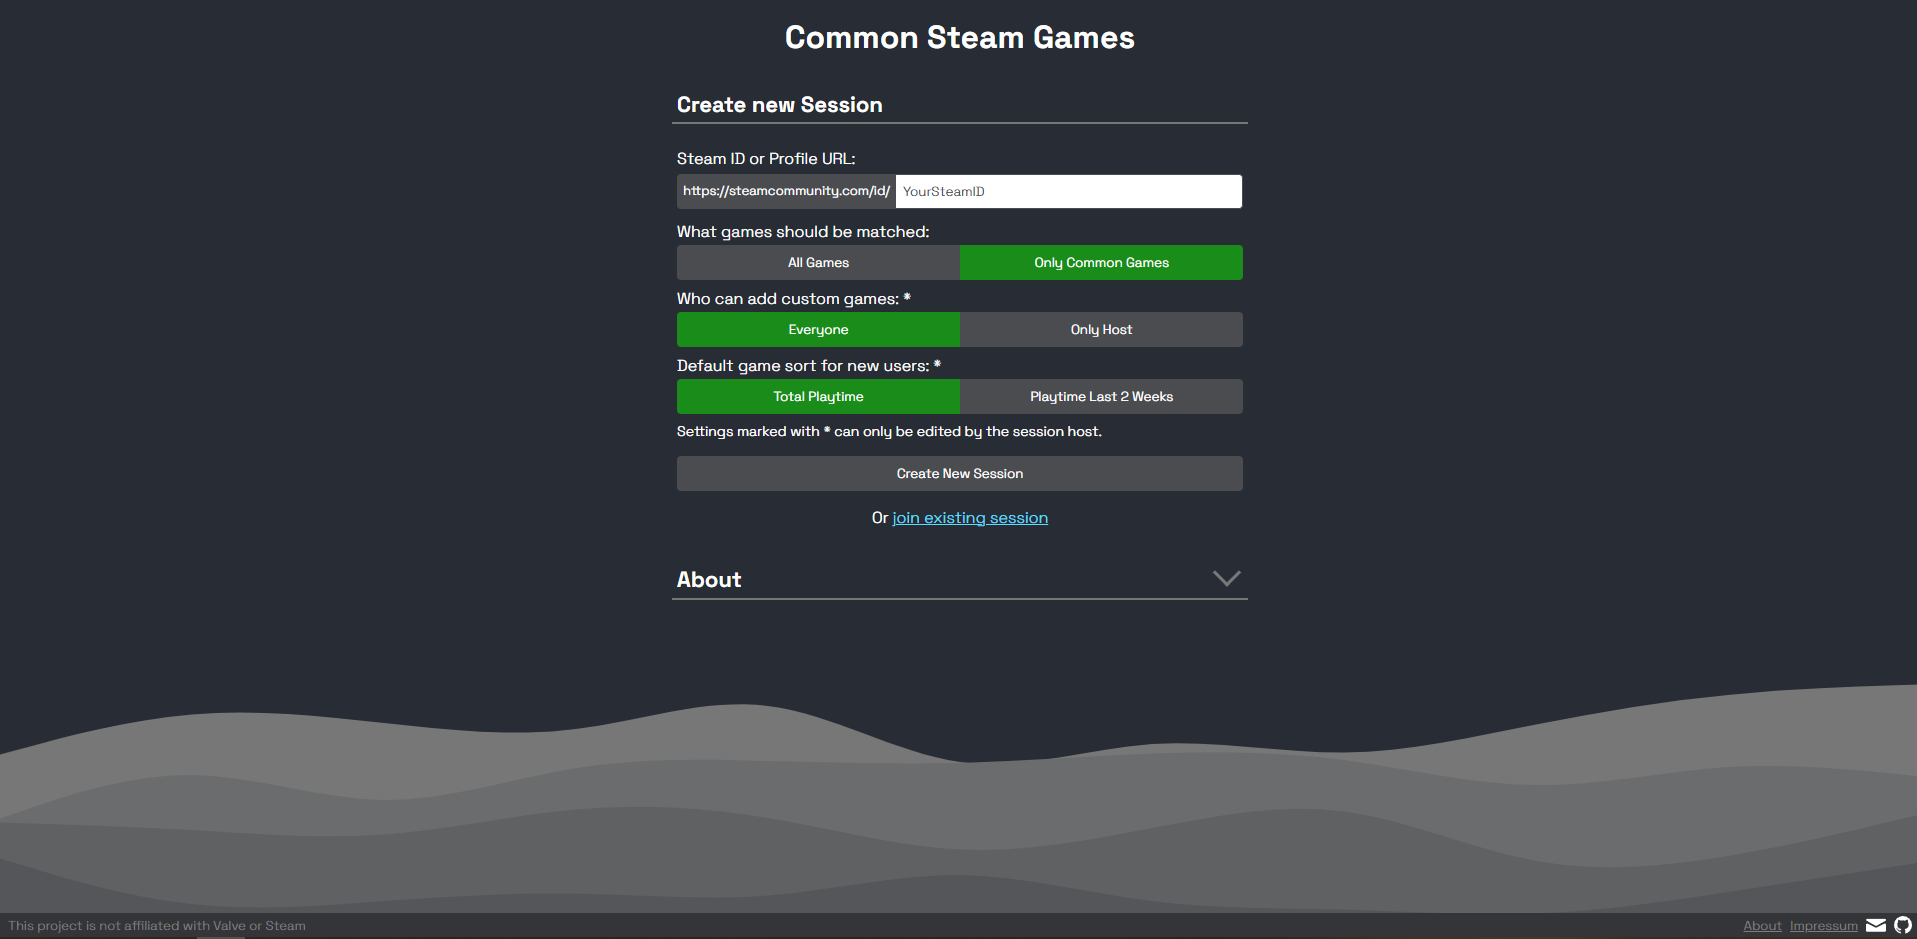 Common Steam Games Landing Page